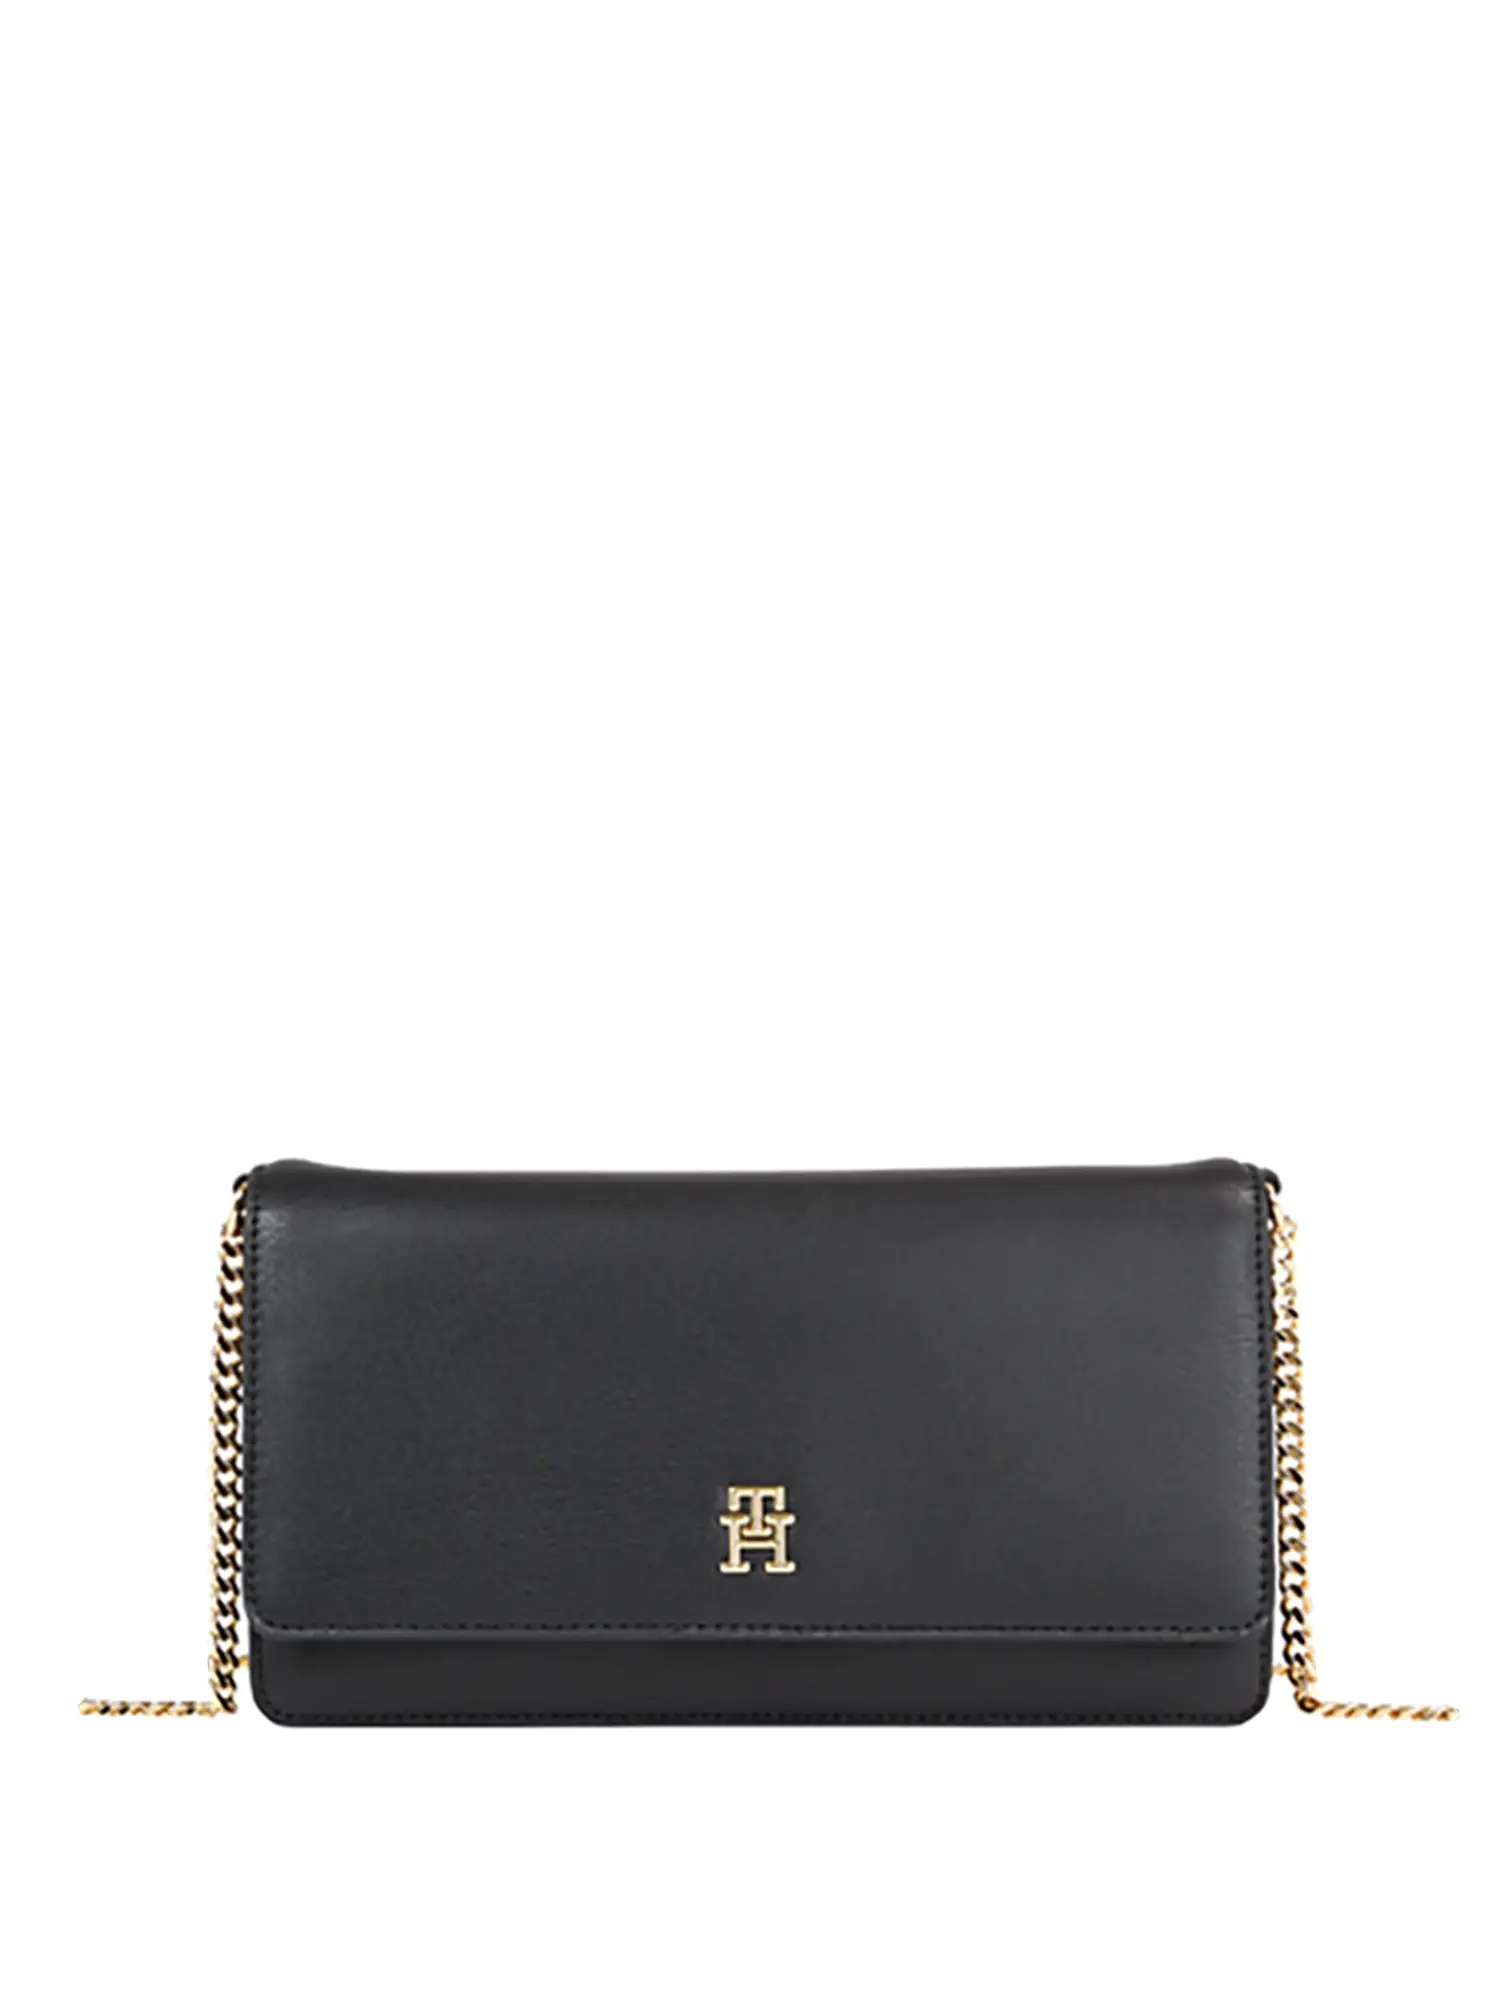 TRACOLLA DONNA - TOMMY HILFIGER - AW0AW16109 - NERO, UNICA